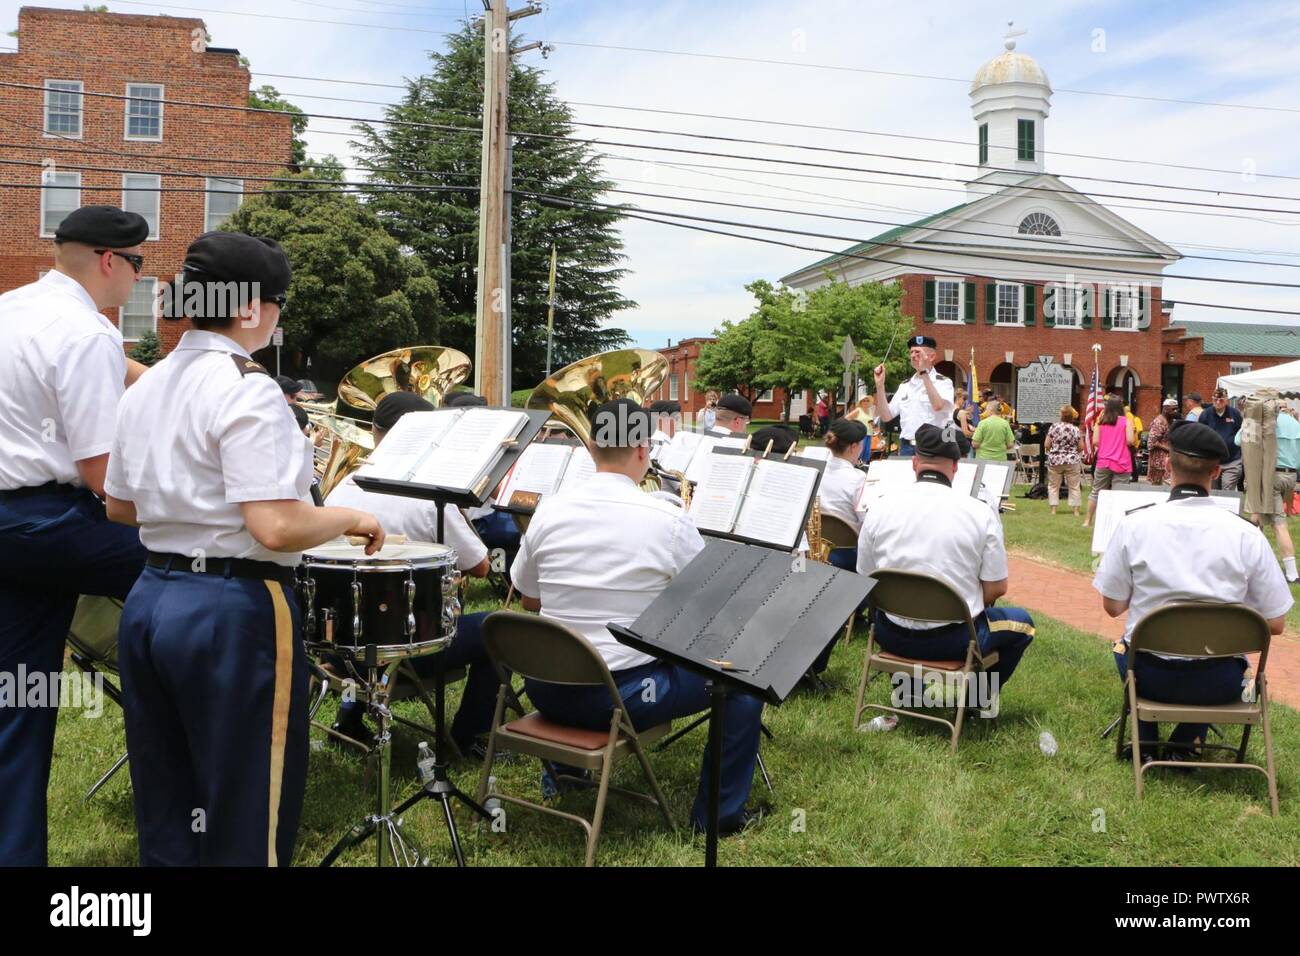 The Virginia National Guard's 29th Division Band provides music June 24, 2017, In Madison, Virginia, for a ceremony dedicating a new historical highway marker honoring a Medal of Honor recipient born in the county. The marker recognizes U.S. Army Cpl. Clinton Greaves and his act of 'extraordinary heroism' during a U.S. cavalry fight with Apache Indians on Jan. 24, 1877, in the Florida Mountains of New Mexico. The event was sponsored by American Legion Post #157, and Congressman Tom Garrett served as the guest speaker. Stock Photo